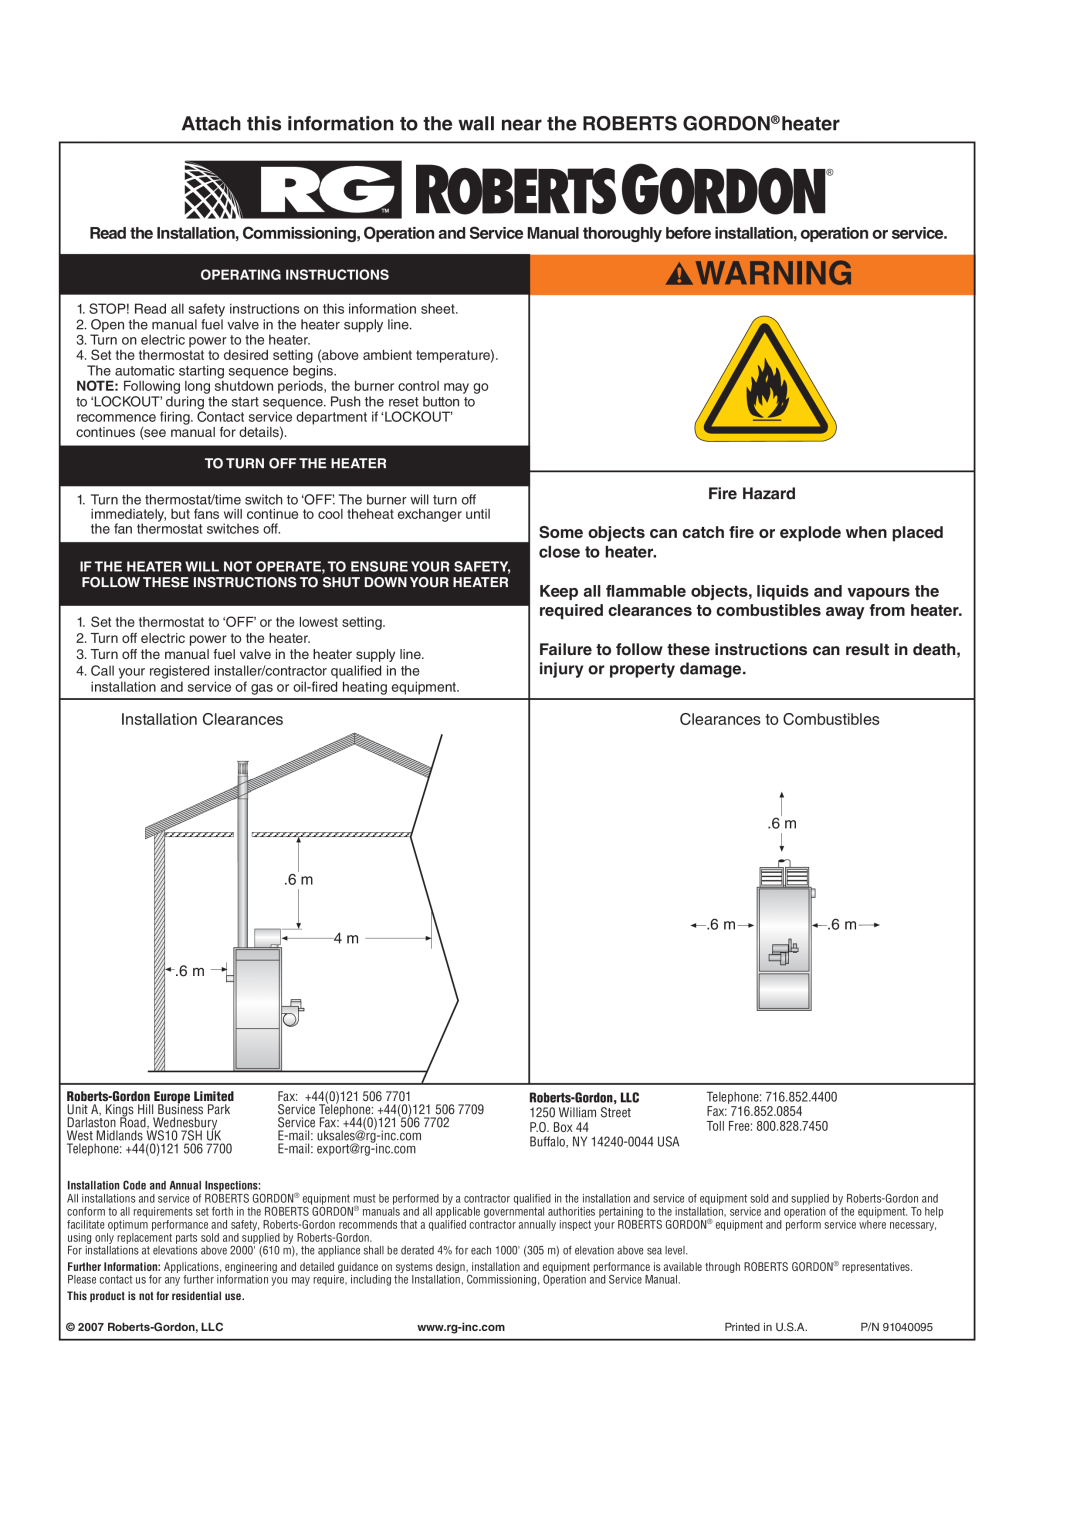 Roberts Gorden POP-ECA/PGP-ECA 015 to 0100 service manual Fire Hazard, Some objects can catch fire or explode when placed 